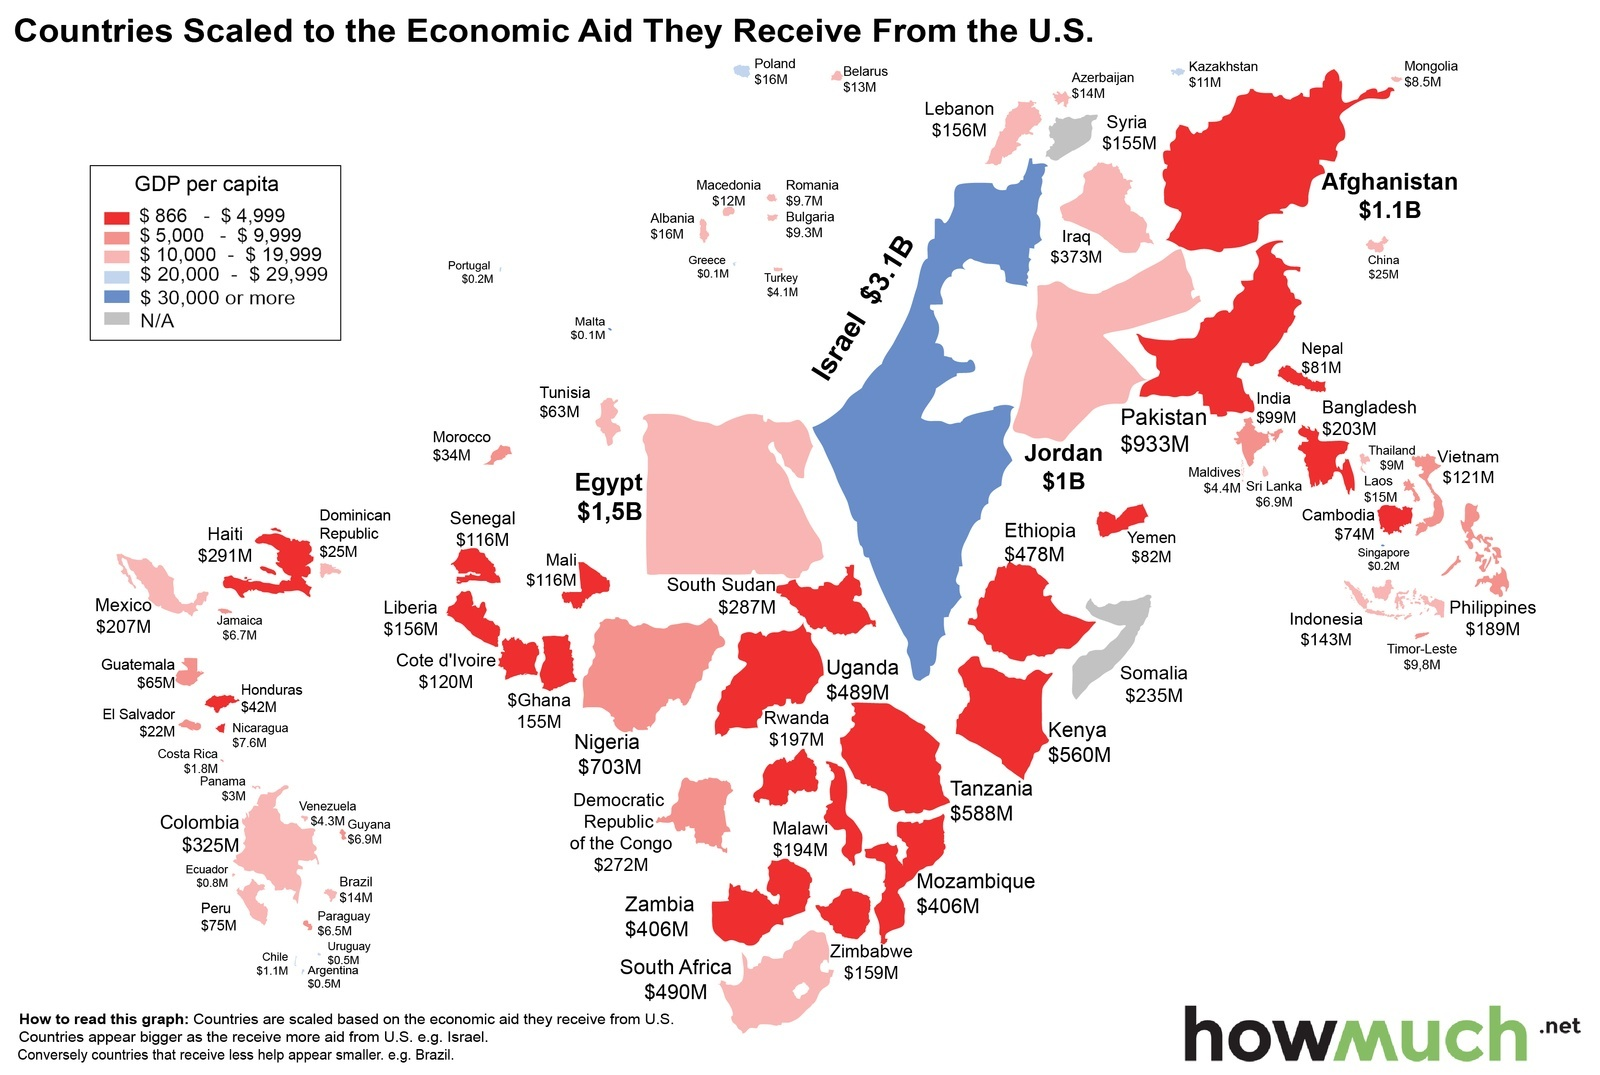 http://ritholtz.com/2015/12/countries-scaled-to-the-economic-aid-received-from-the-us/